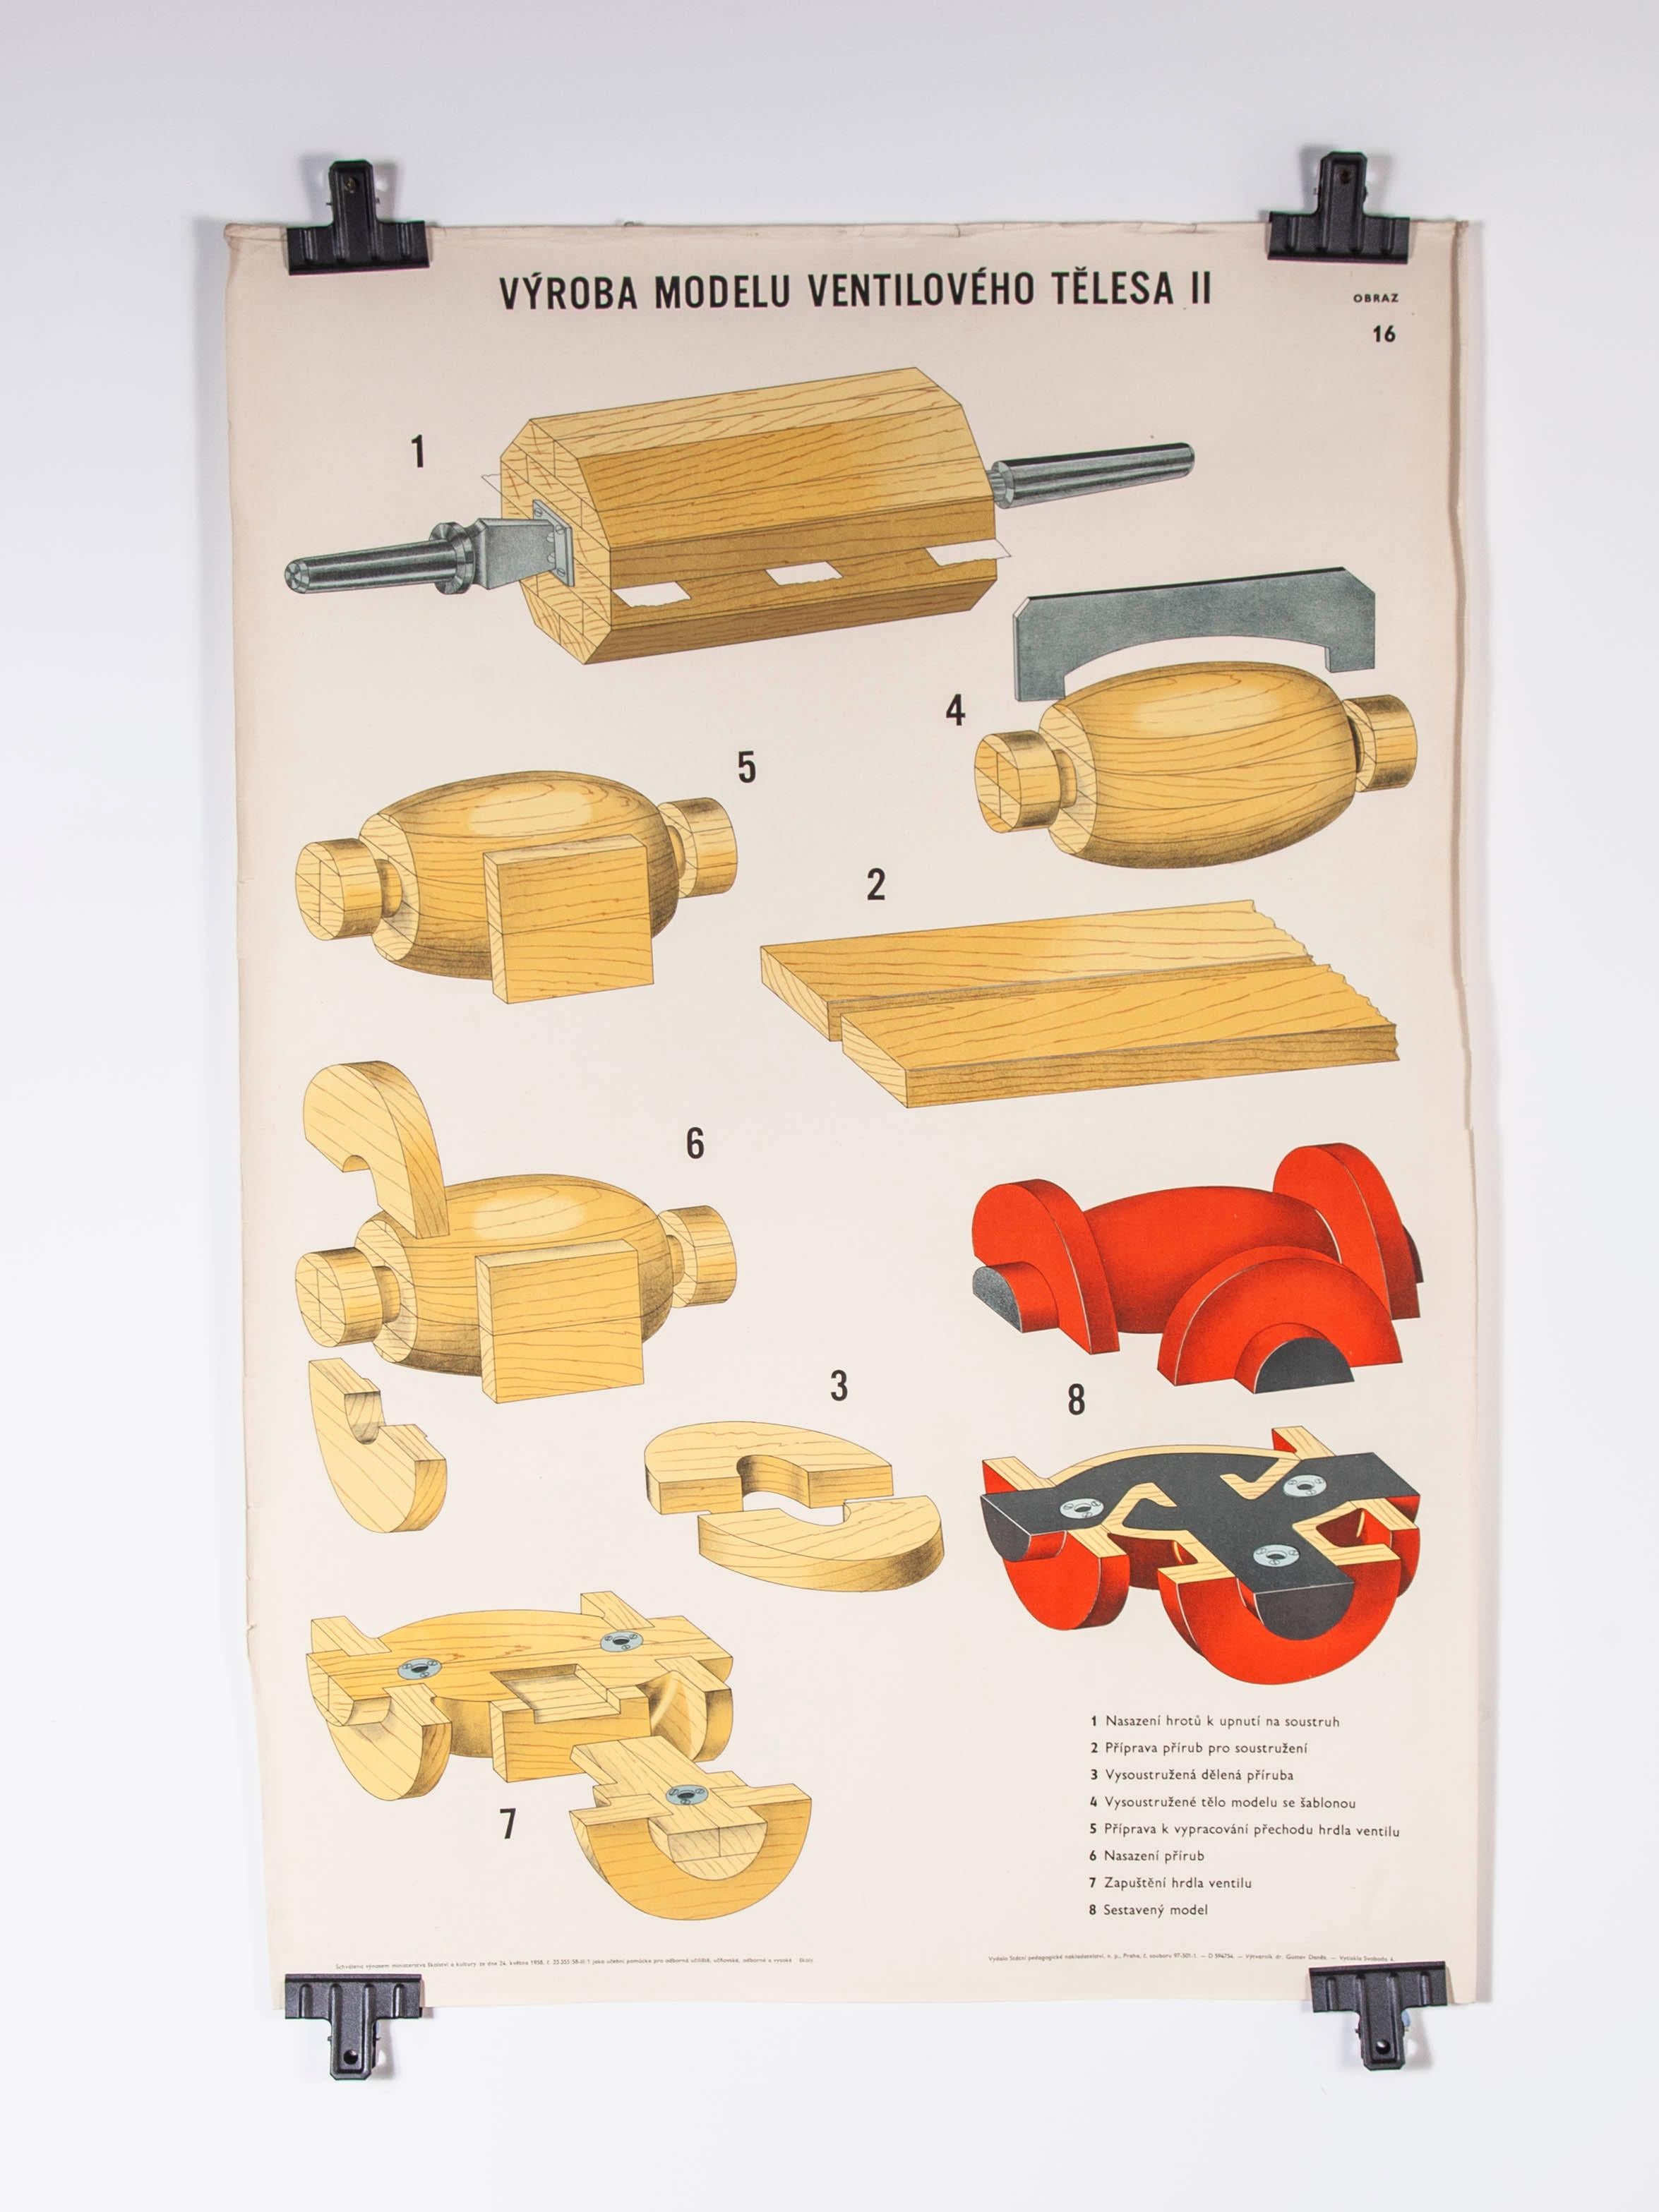 Czech technical industrial drawing, foundry mould engineering poster – 16

Sourced from an old engineering workshop in the Czech Republic, an amazing series of technical Industrial drawings explaining the process of sand casting and creating the